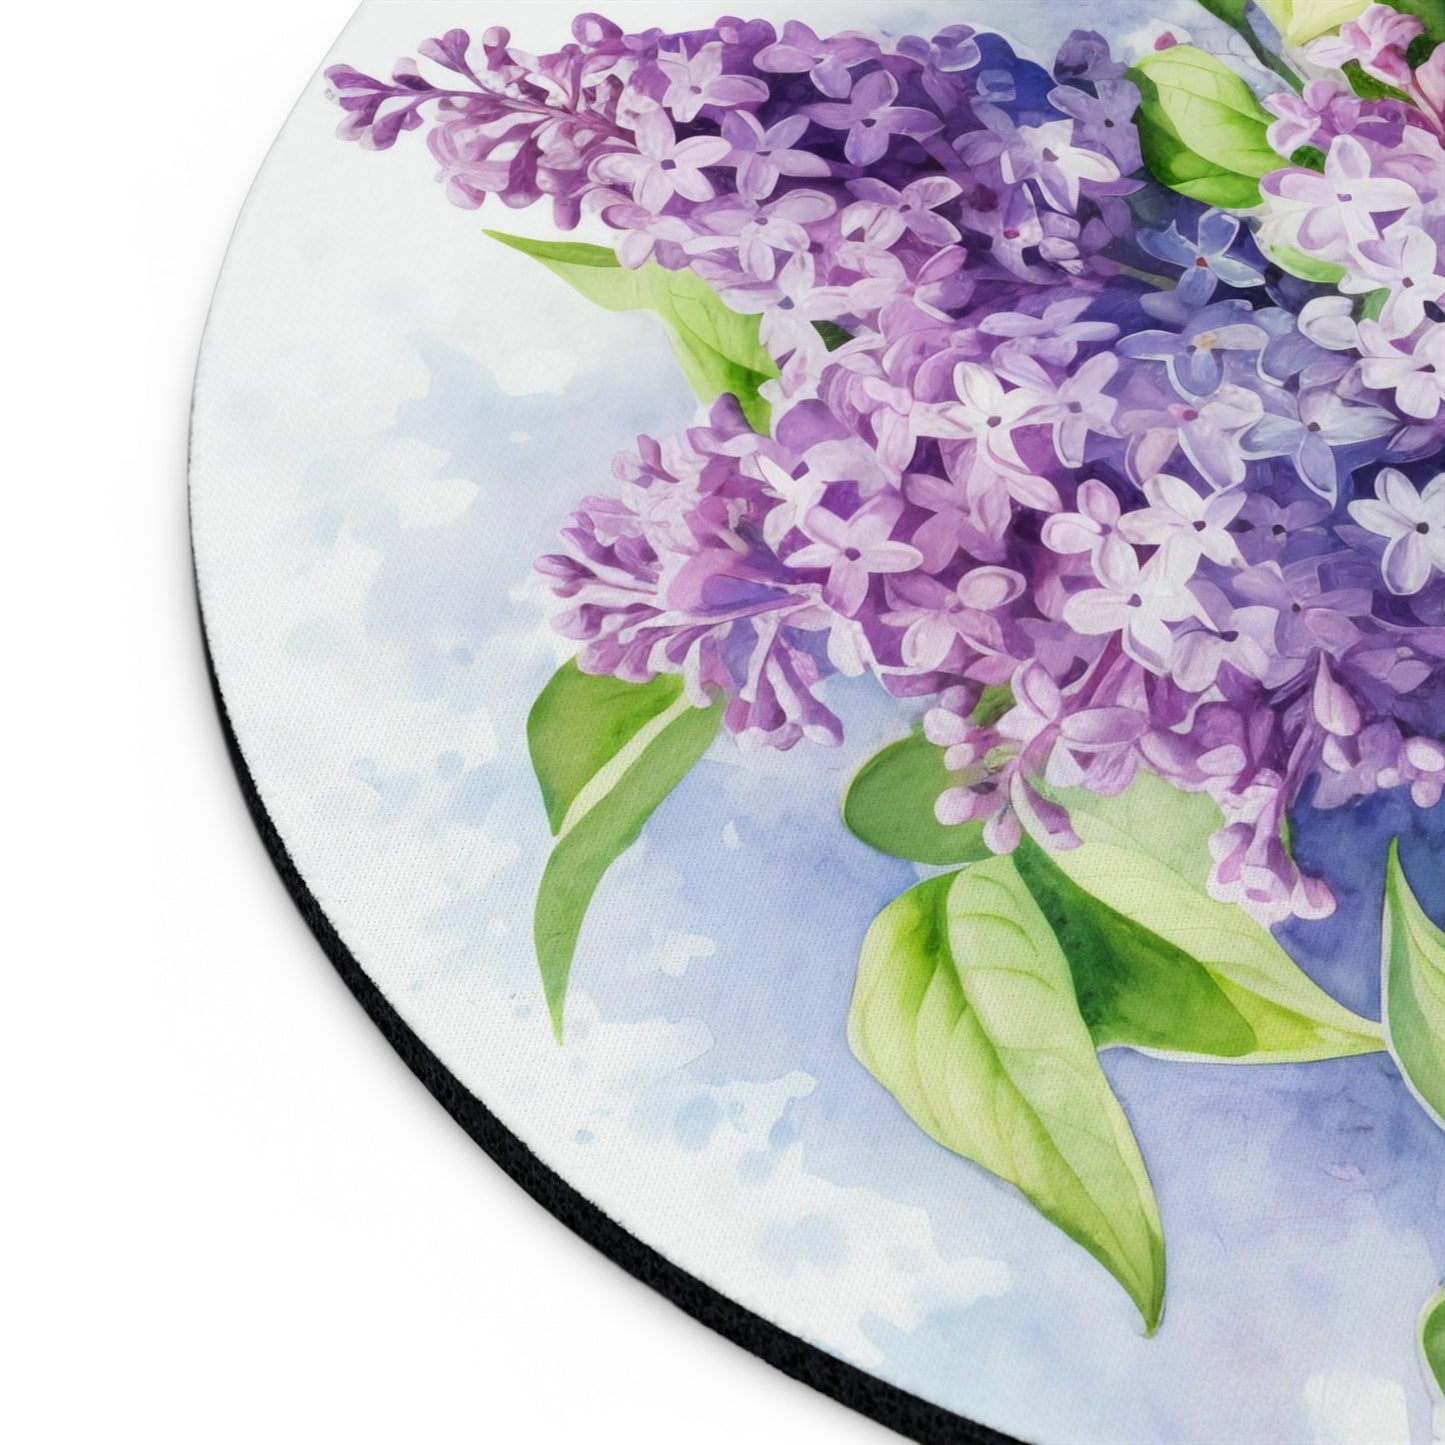 Lilac Blossoms Mouse Pad, Purple Home Office Desk Decor, Round Mousepad with Watercolor Lilac Flowers, Calming Workspace Accessory